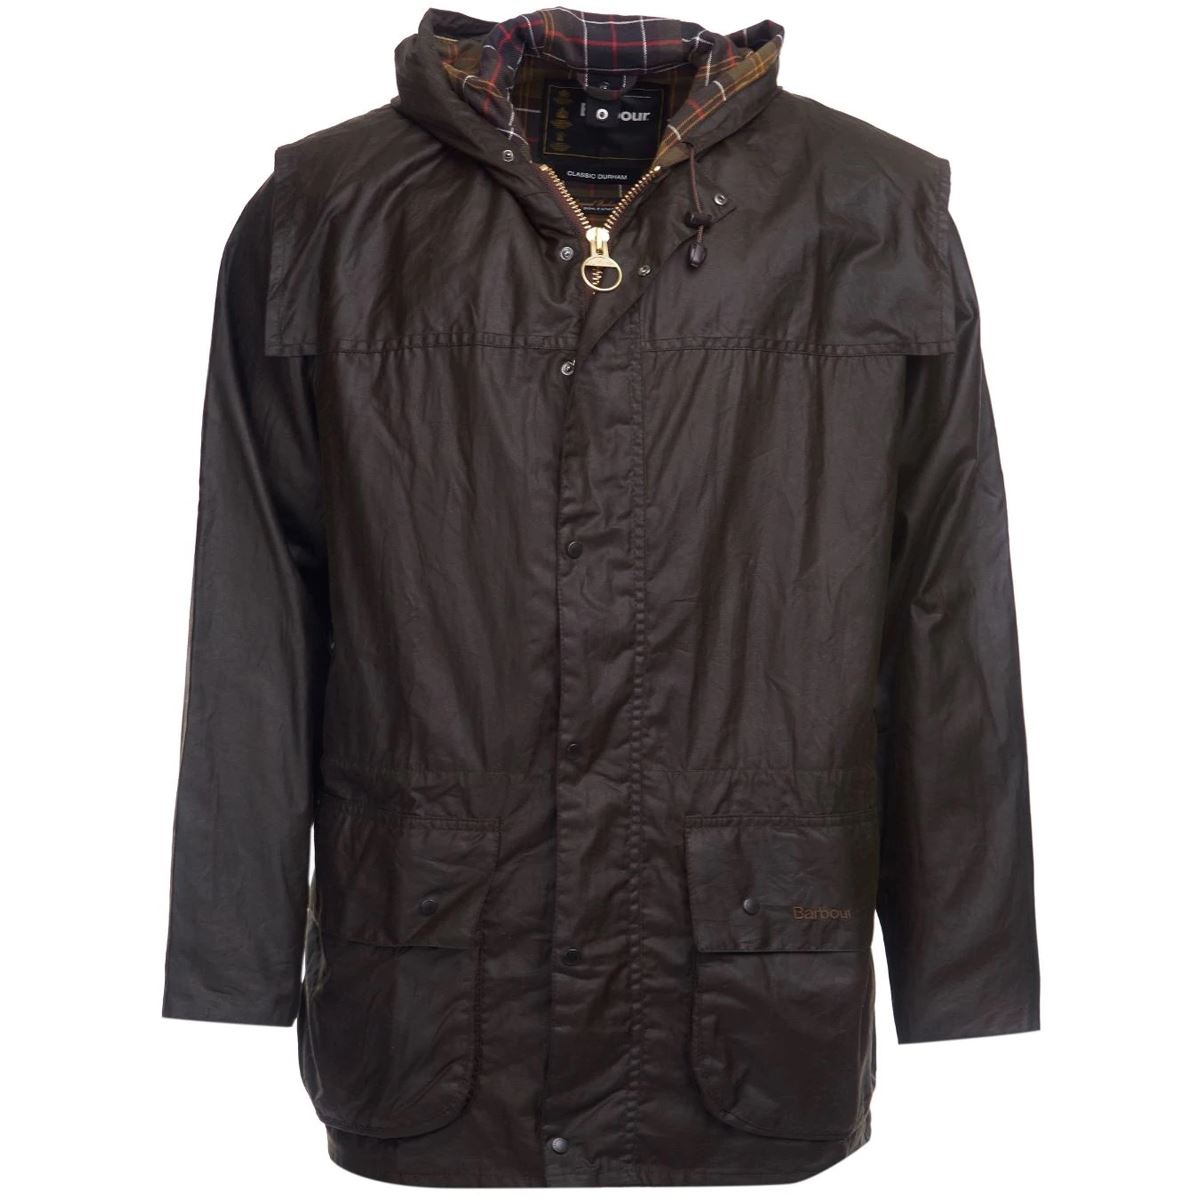 What sizes does the Barbour Durham Jacket come in?